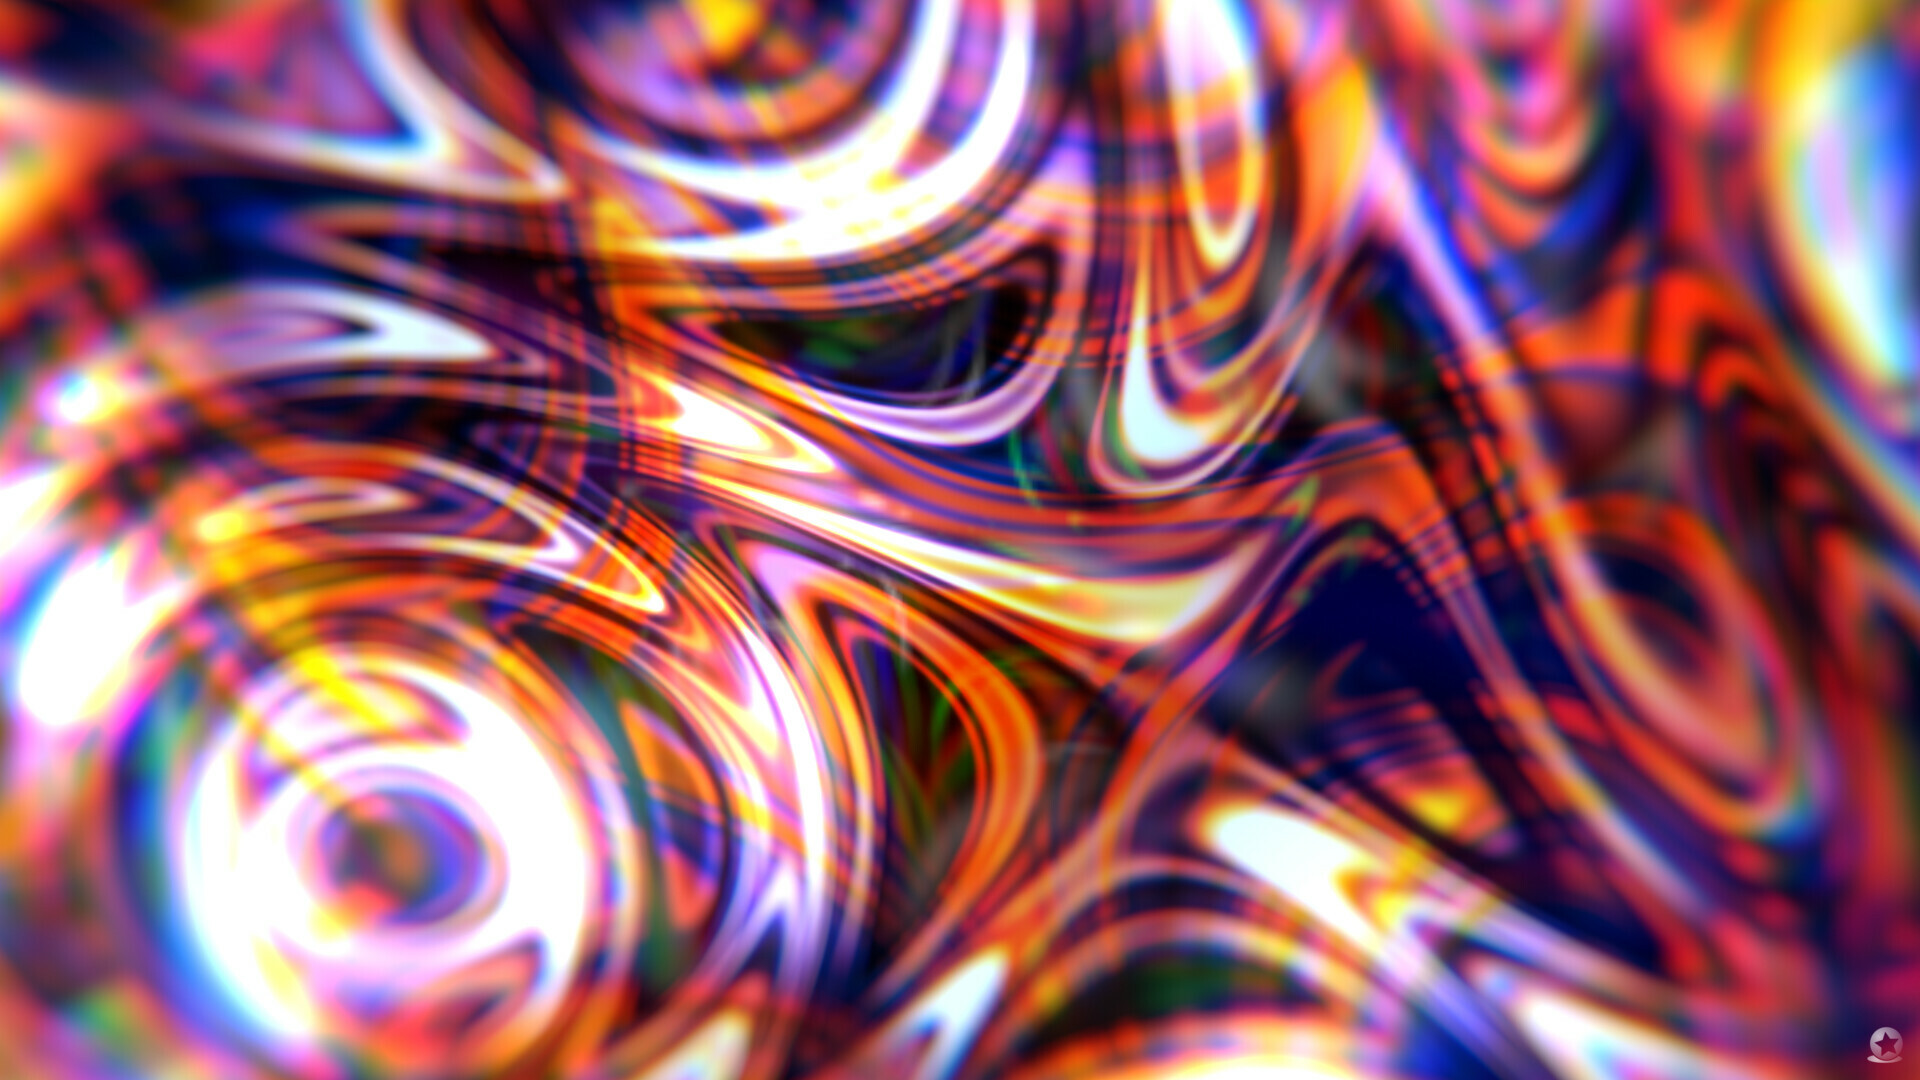 Abstract Psychedelic Colorful Waves Dreamscape Glass 1920x1080